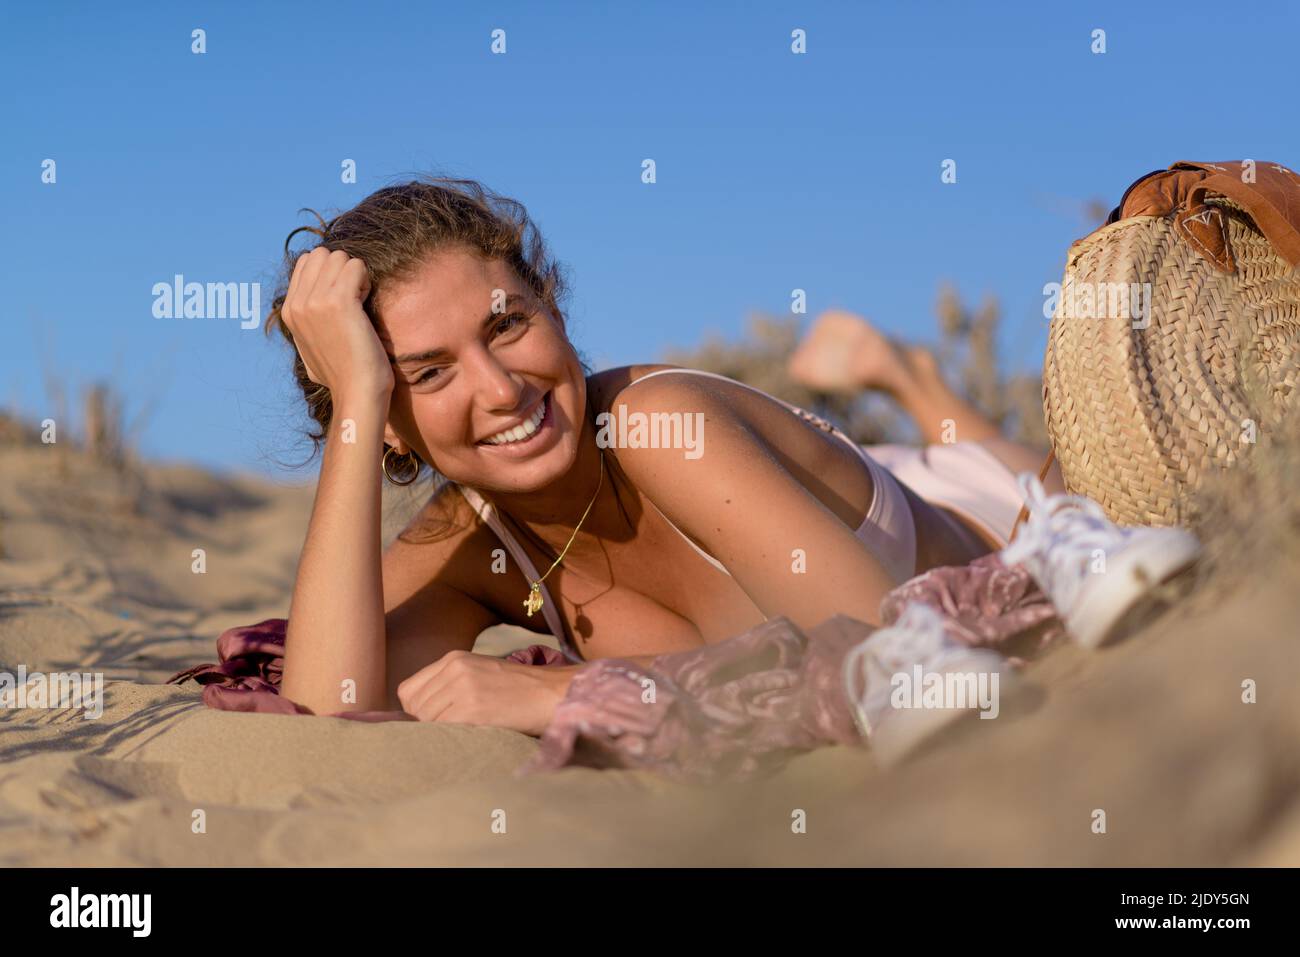 Happy young woman lying down enjoys her vacation in the sand by the beach. Stock Photo